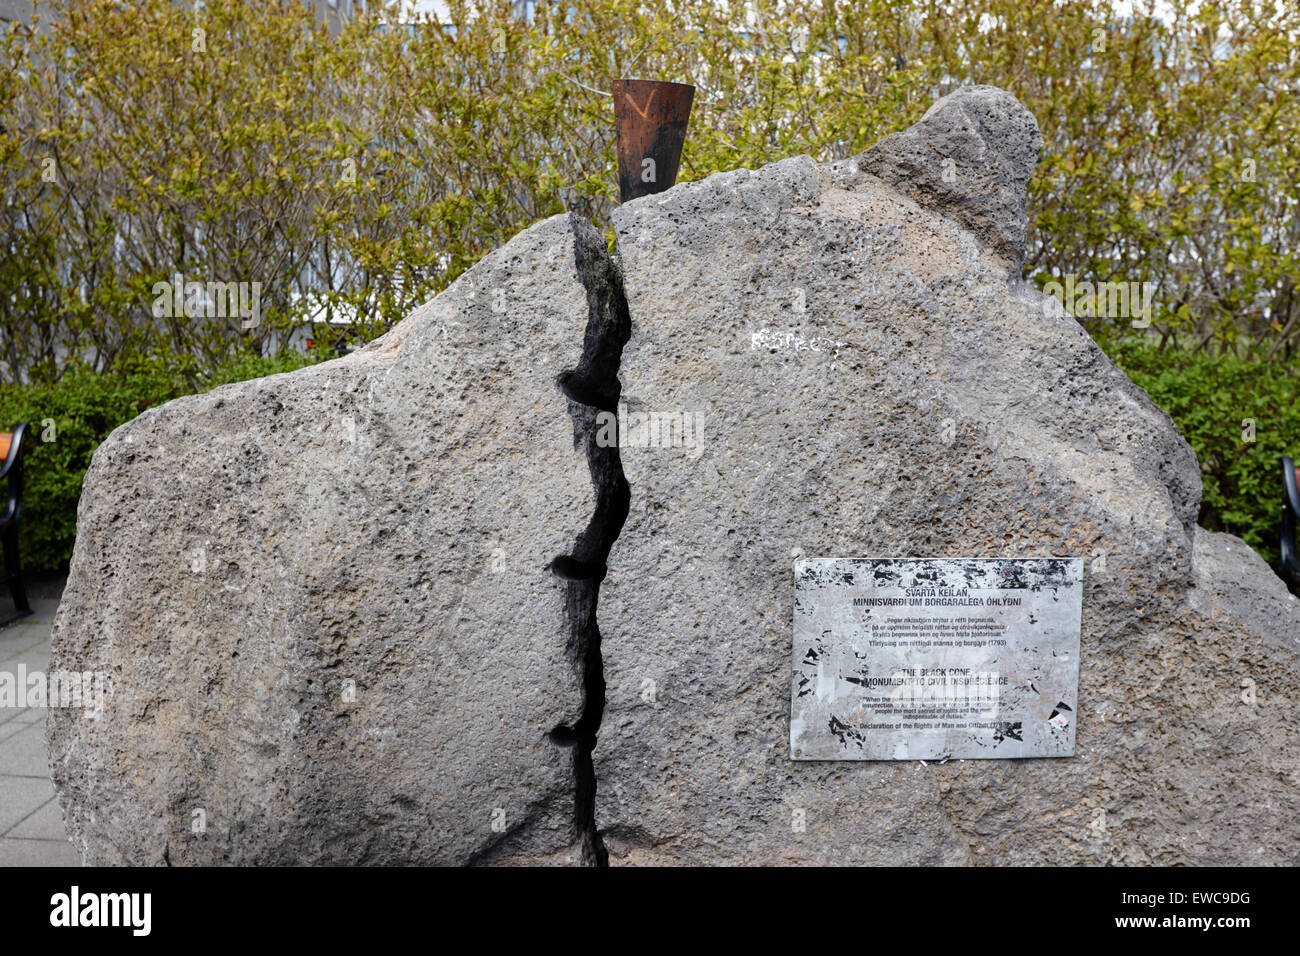 the black cone monument to civil disobedience Reykjavik iceland Stock Photo